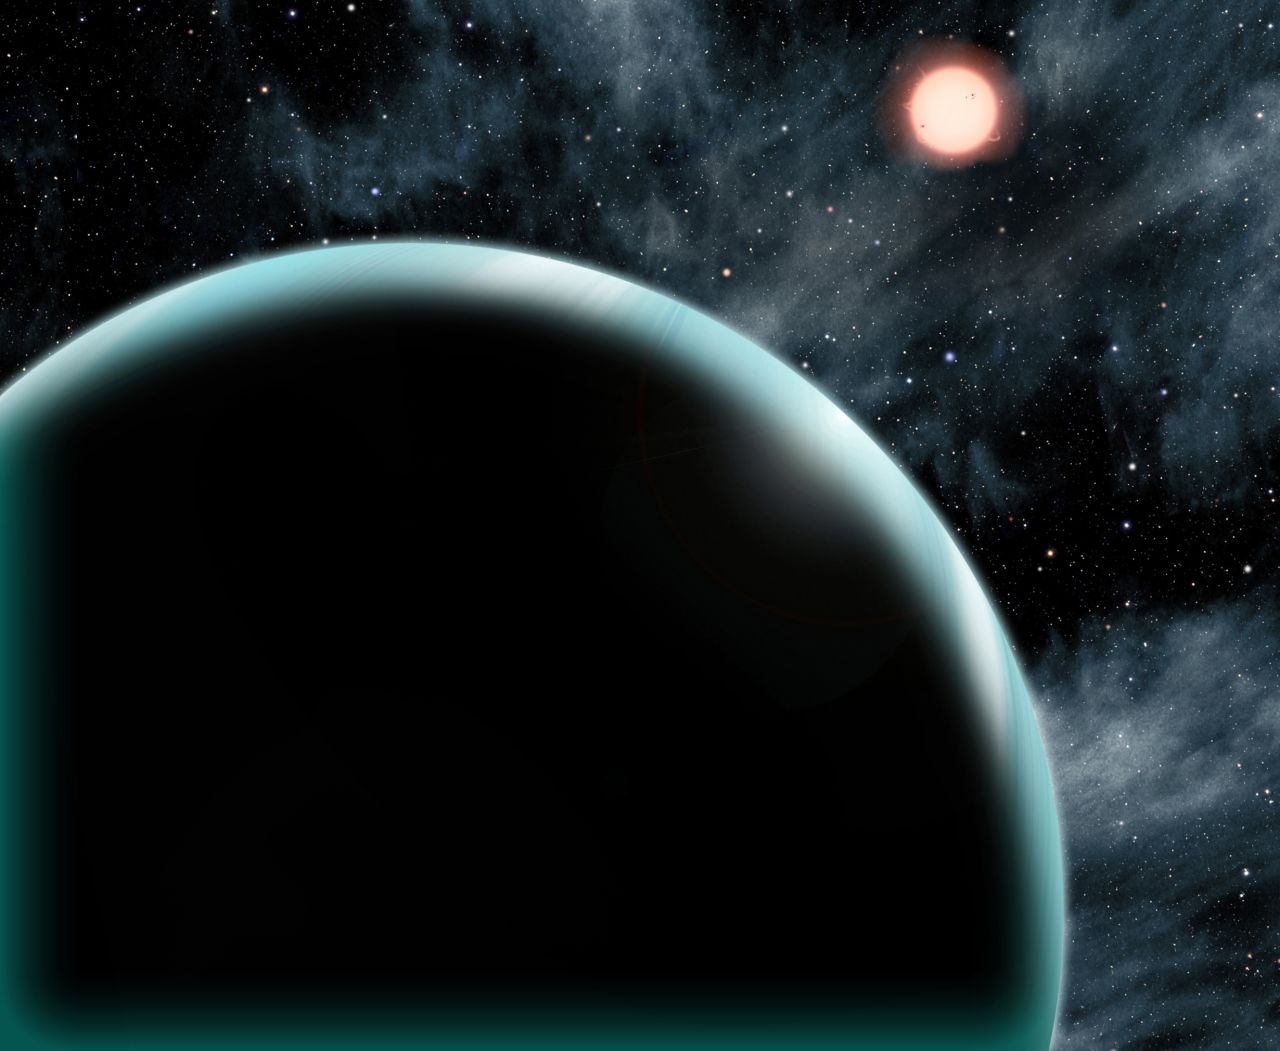 Kepler-421b is a Uranus-sized transiting exoplanet with the longest known year, as it circles its star once every 704 days. The planet orbits an orange, K-type star that is cooler and dimmer than our Sun and is located about 1,000 light-years from Earth in the constellation Lyra. 